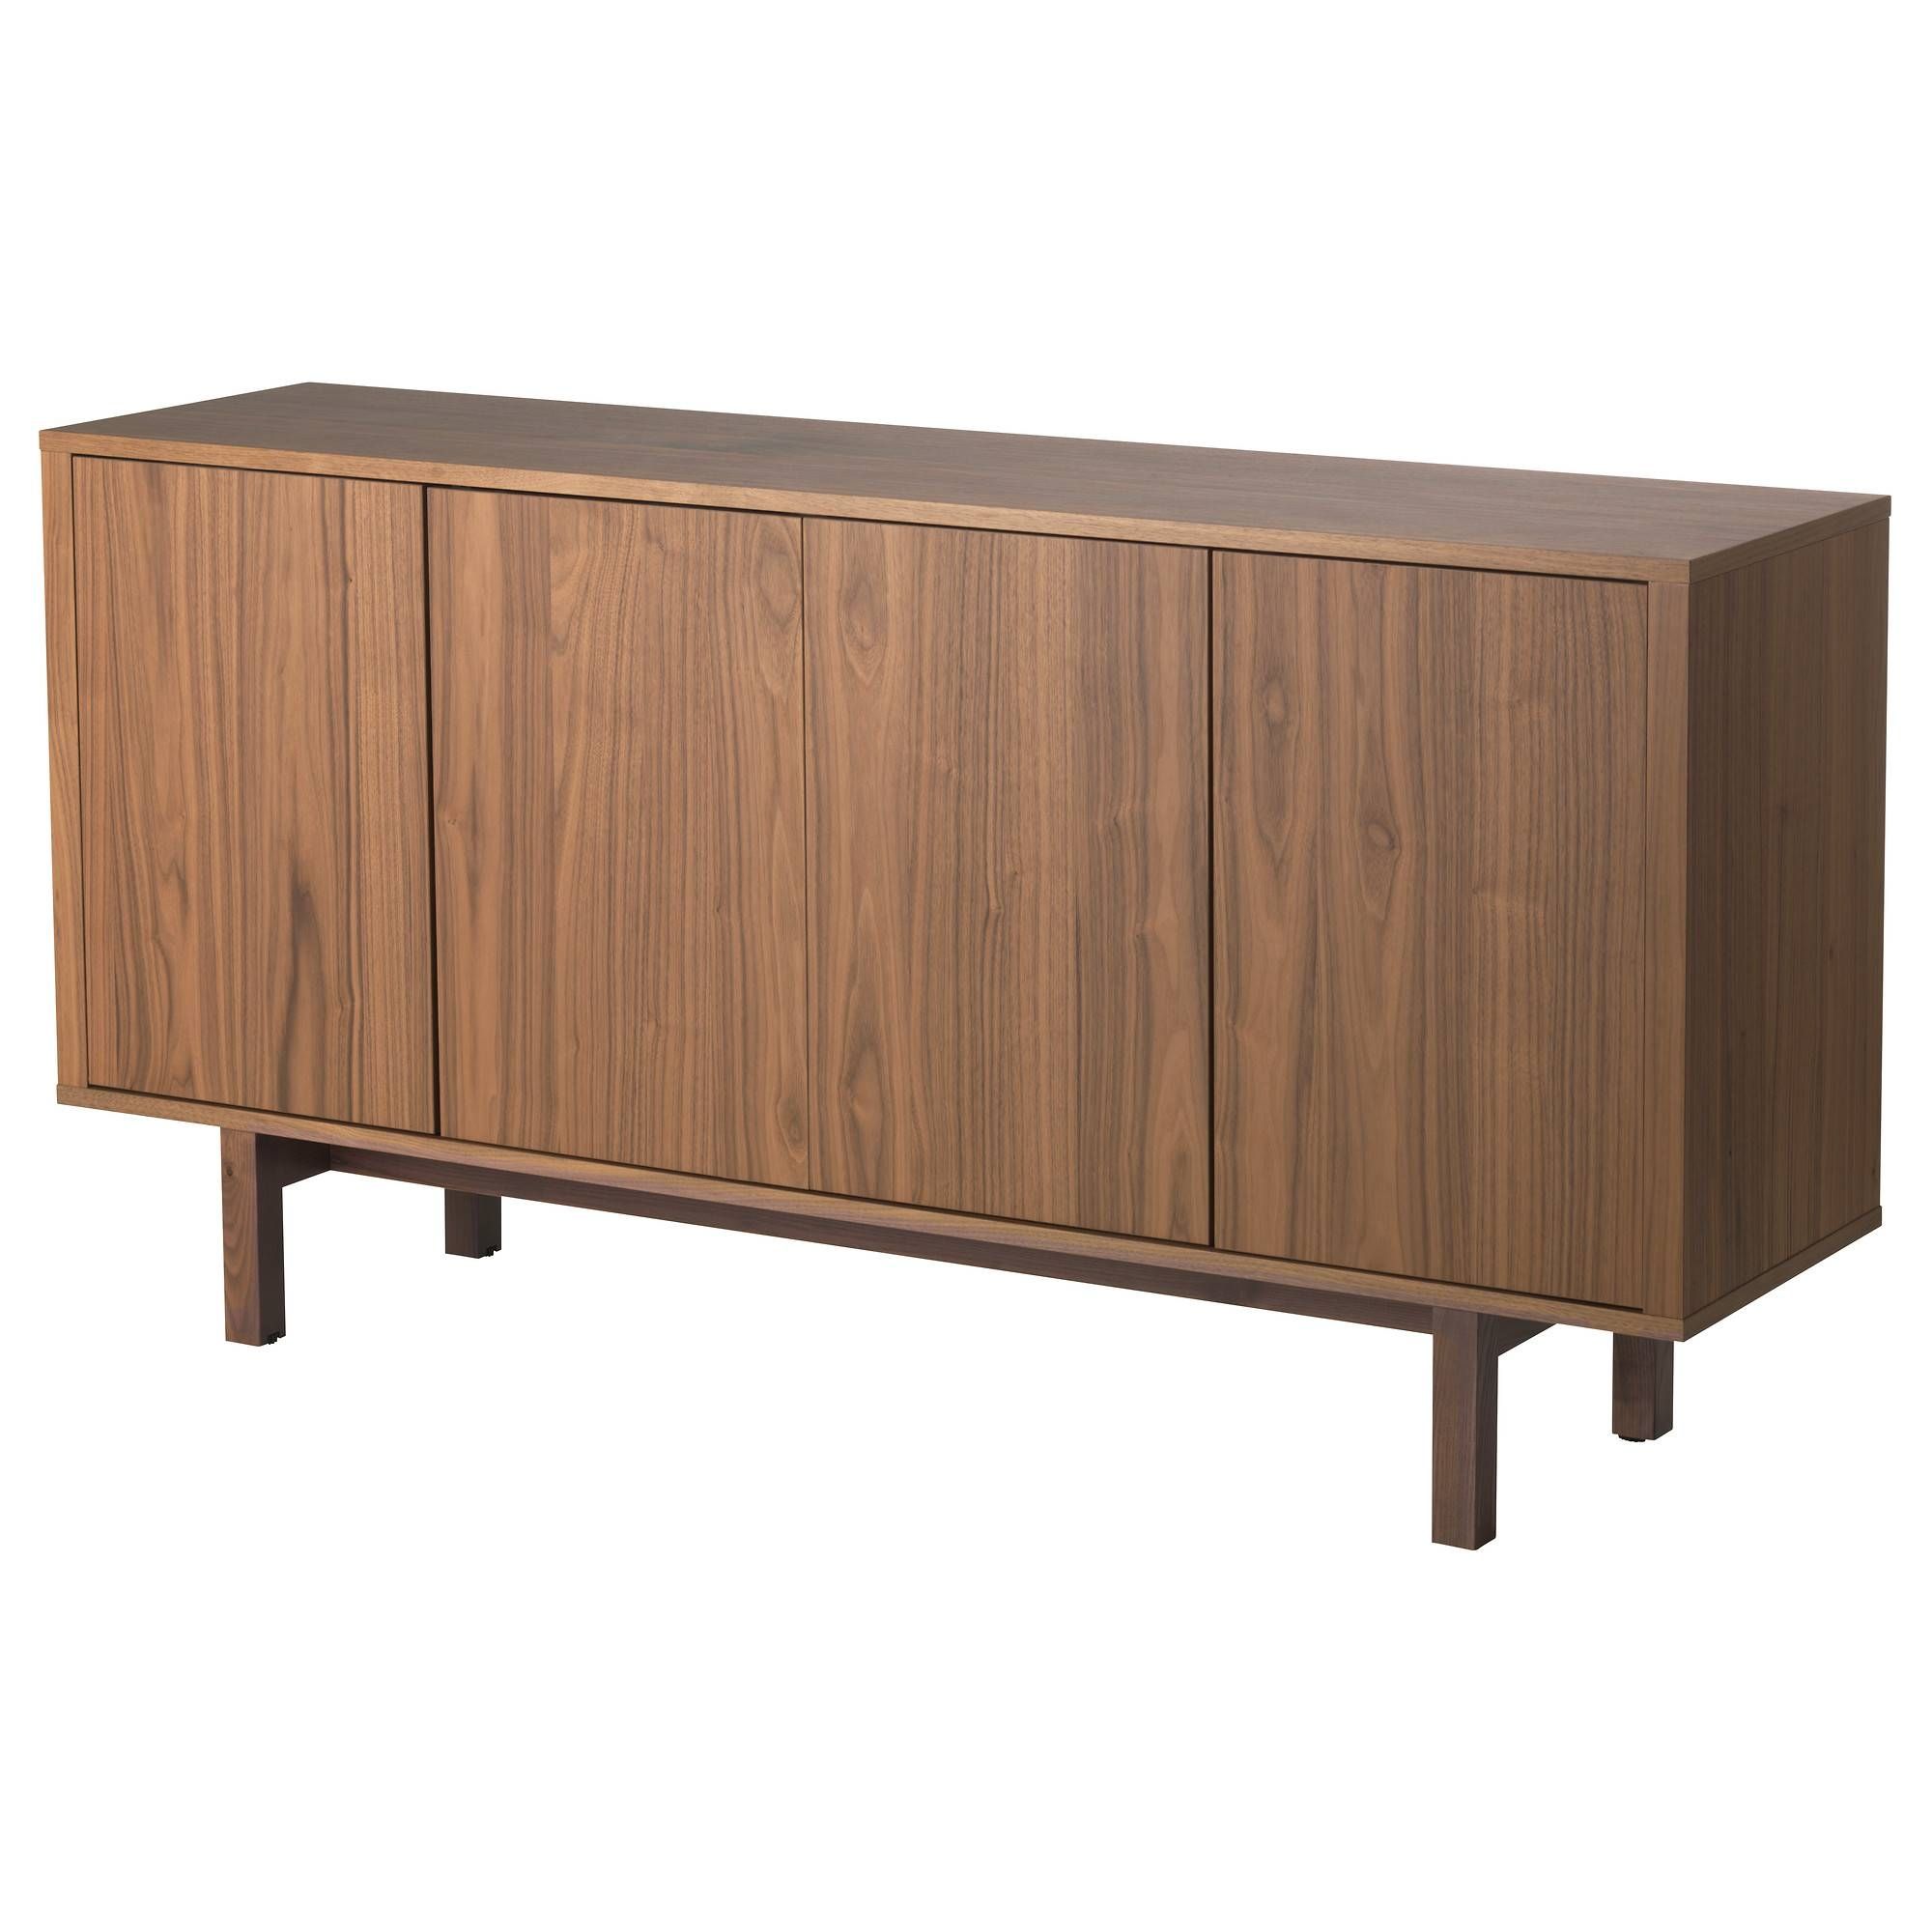 Buffet Tables & Sideboards – Ikea With Current Media Sideboards (View 14 of 15)